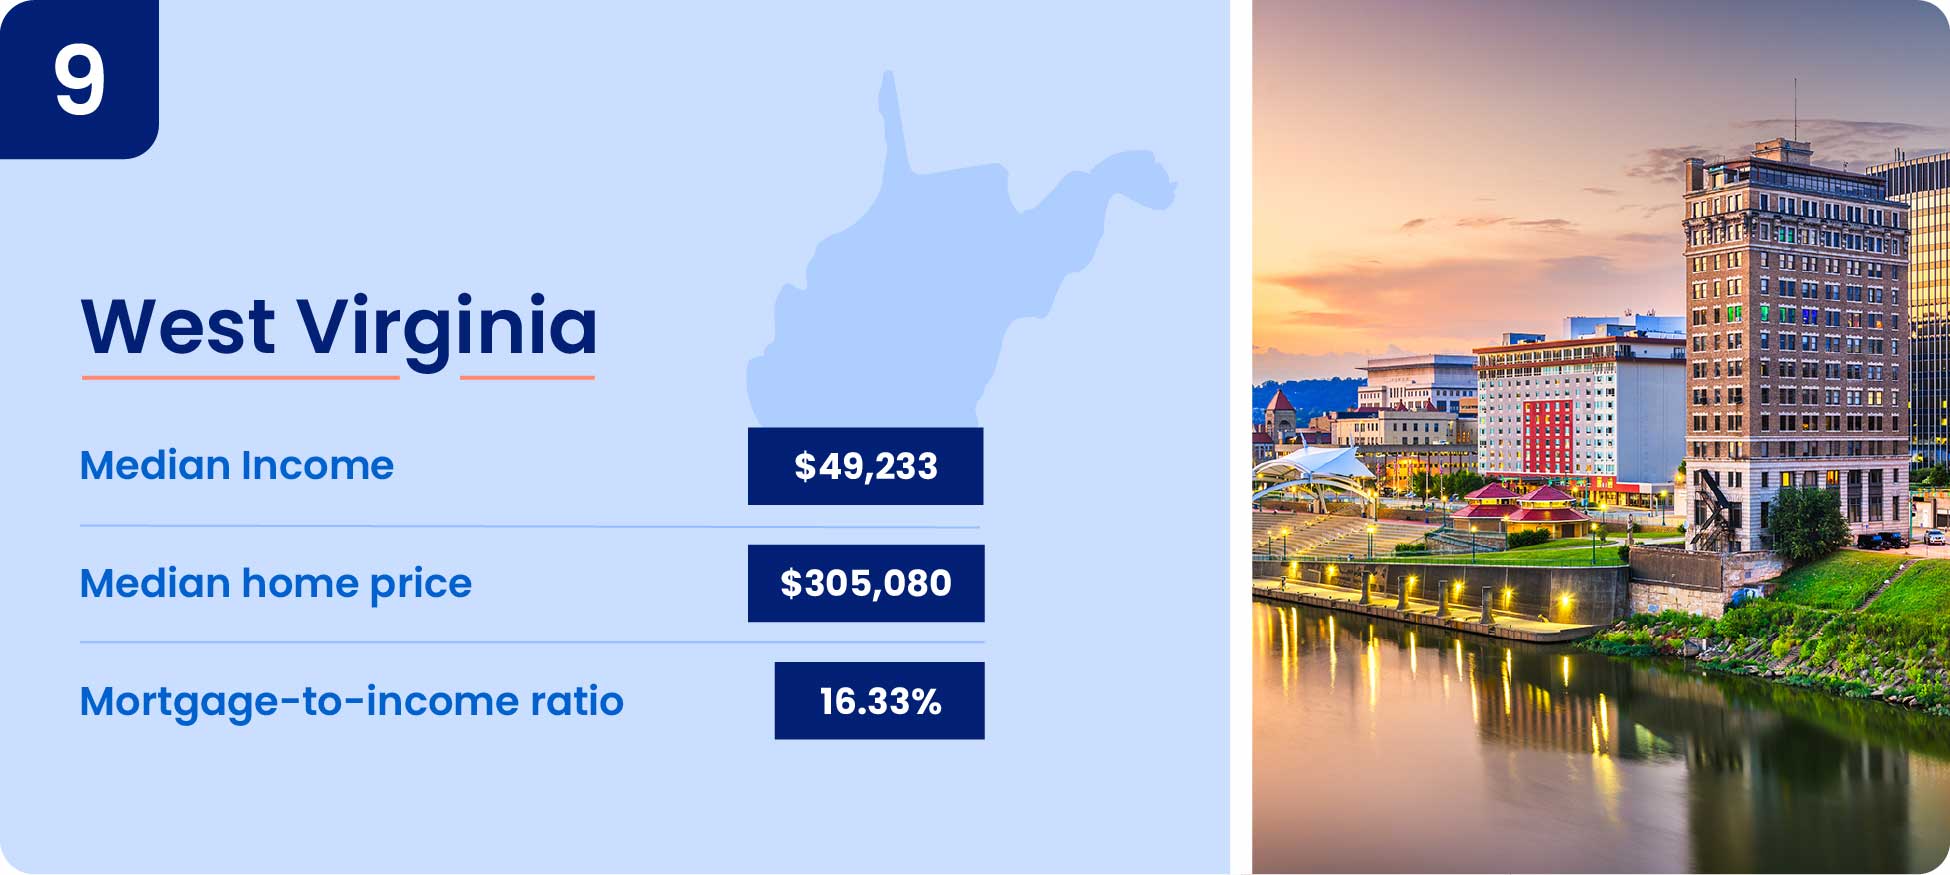 Image shows why one of the cheapest states to buy a house is West Virginia.